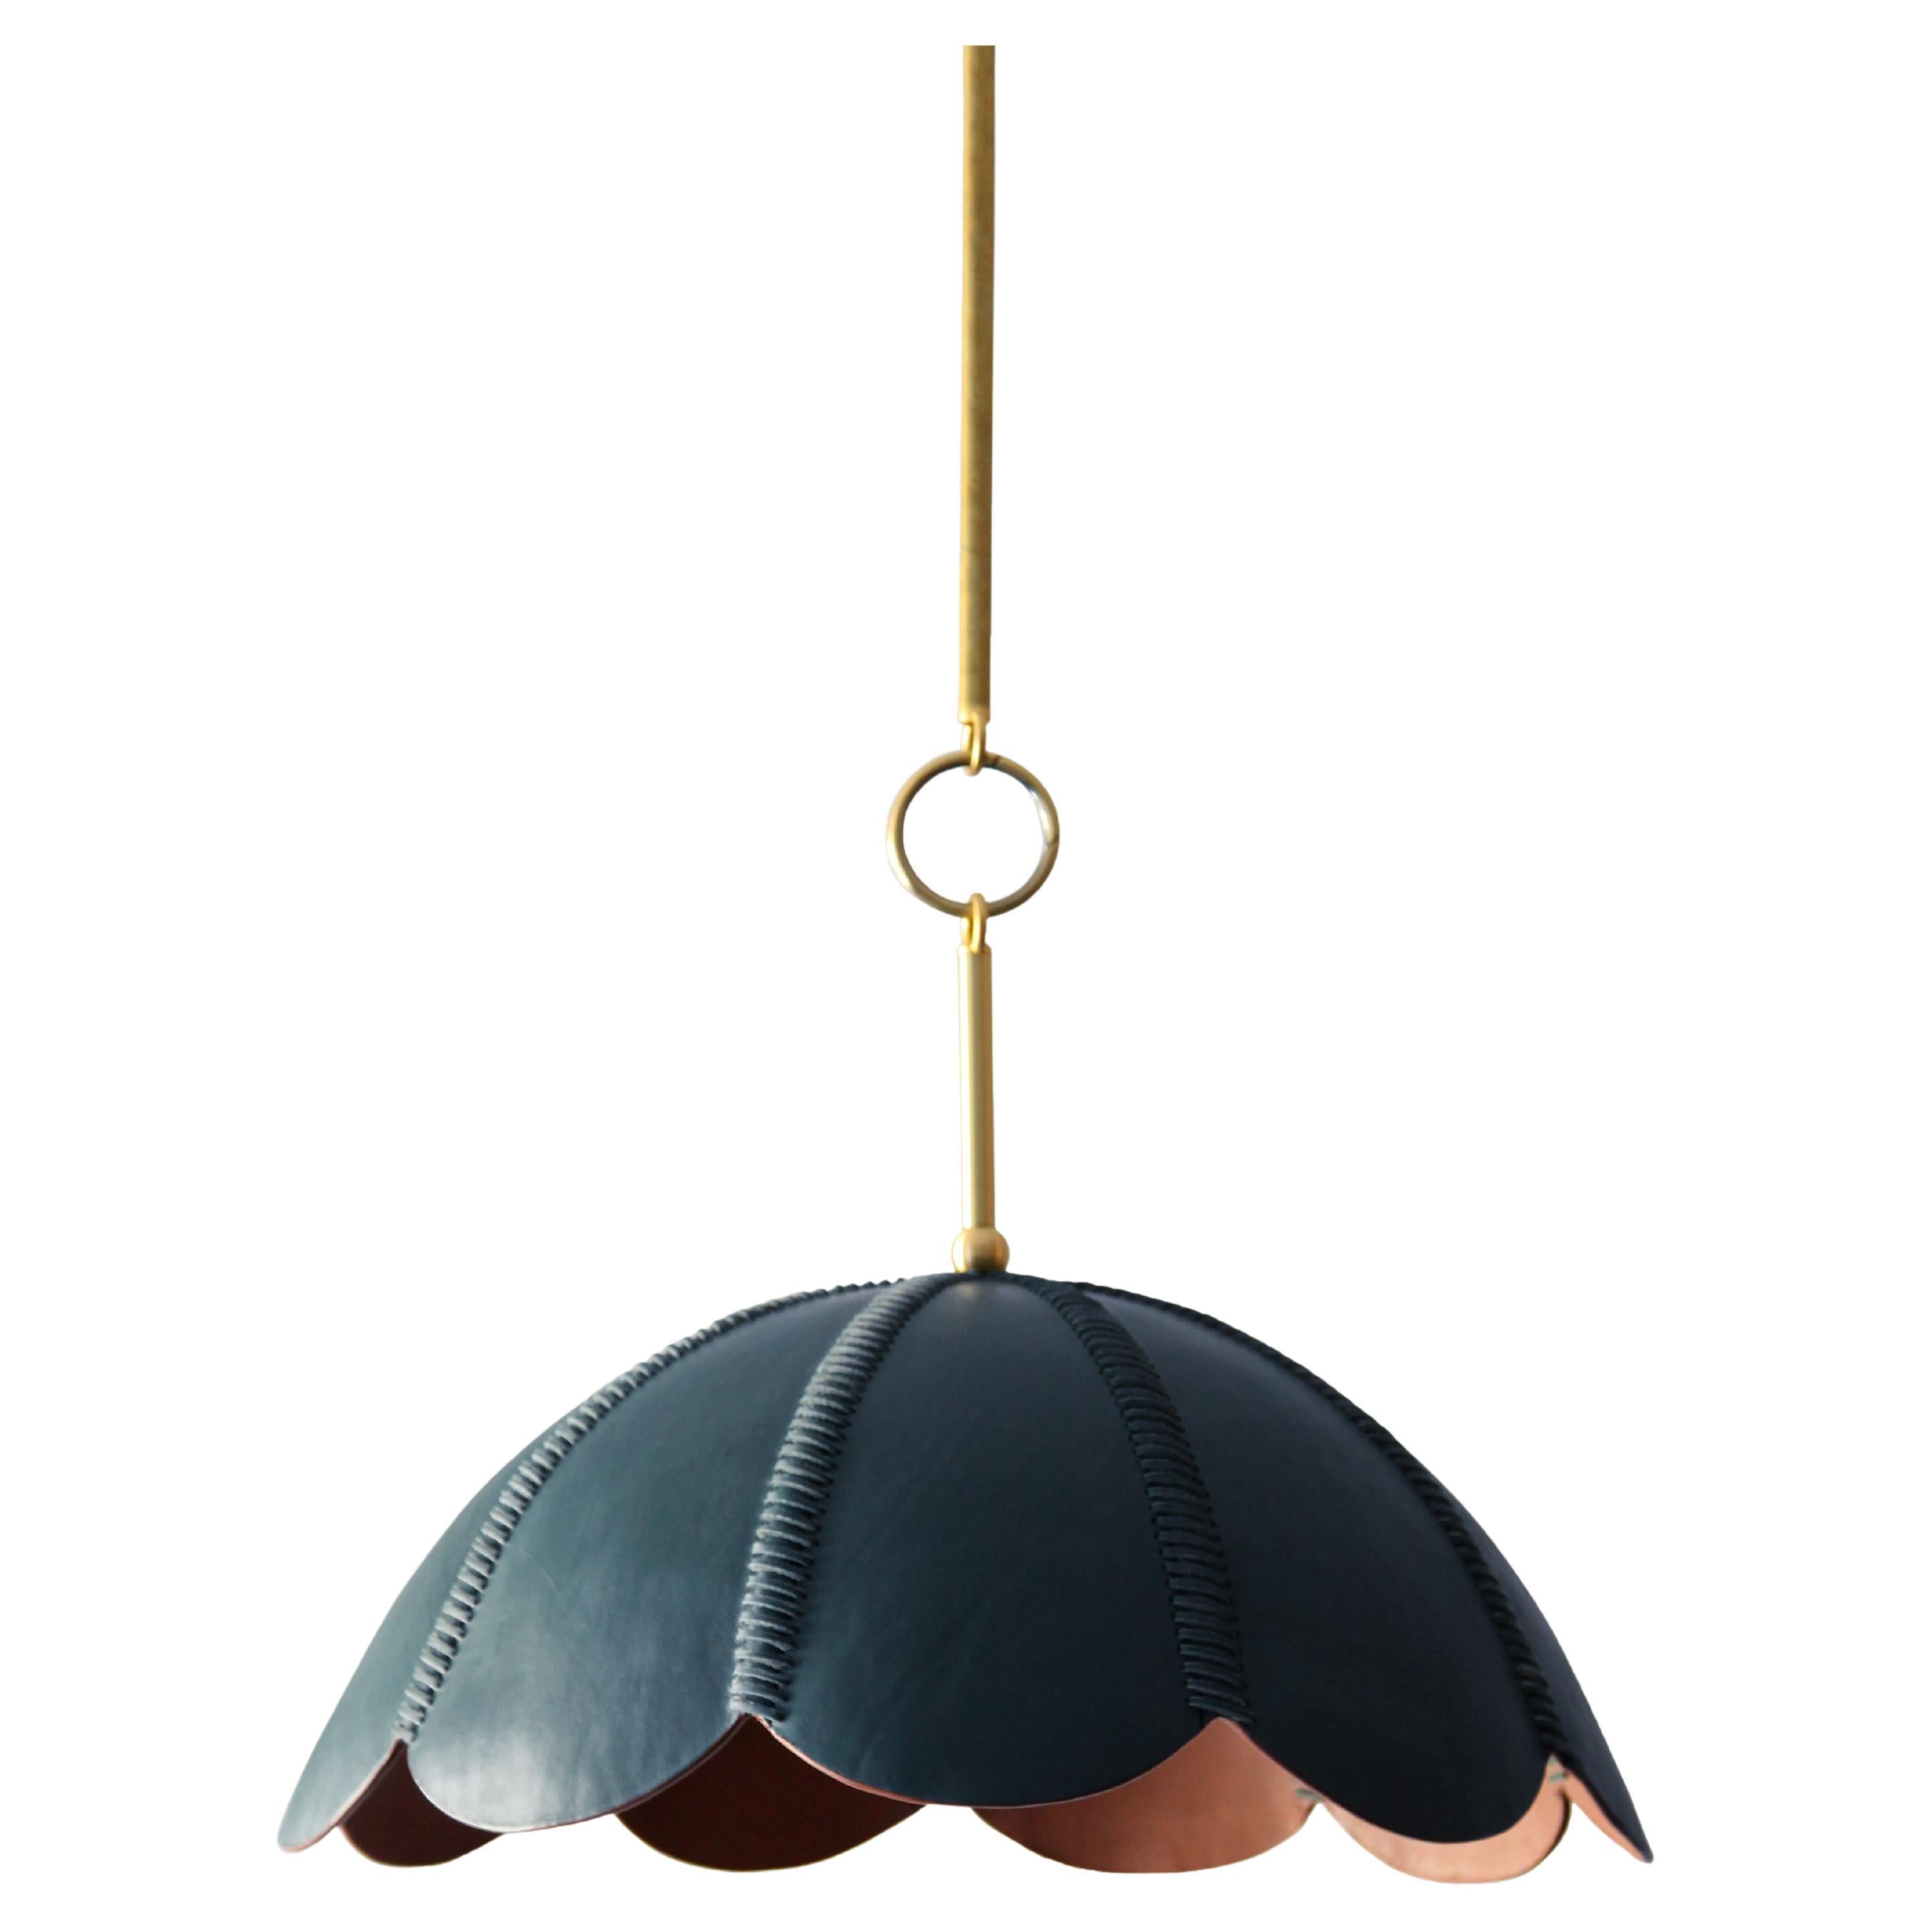 Leather Pendant Light in Cobalt, Capa II, Talabartero Collection Saddle Lamp For Sale